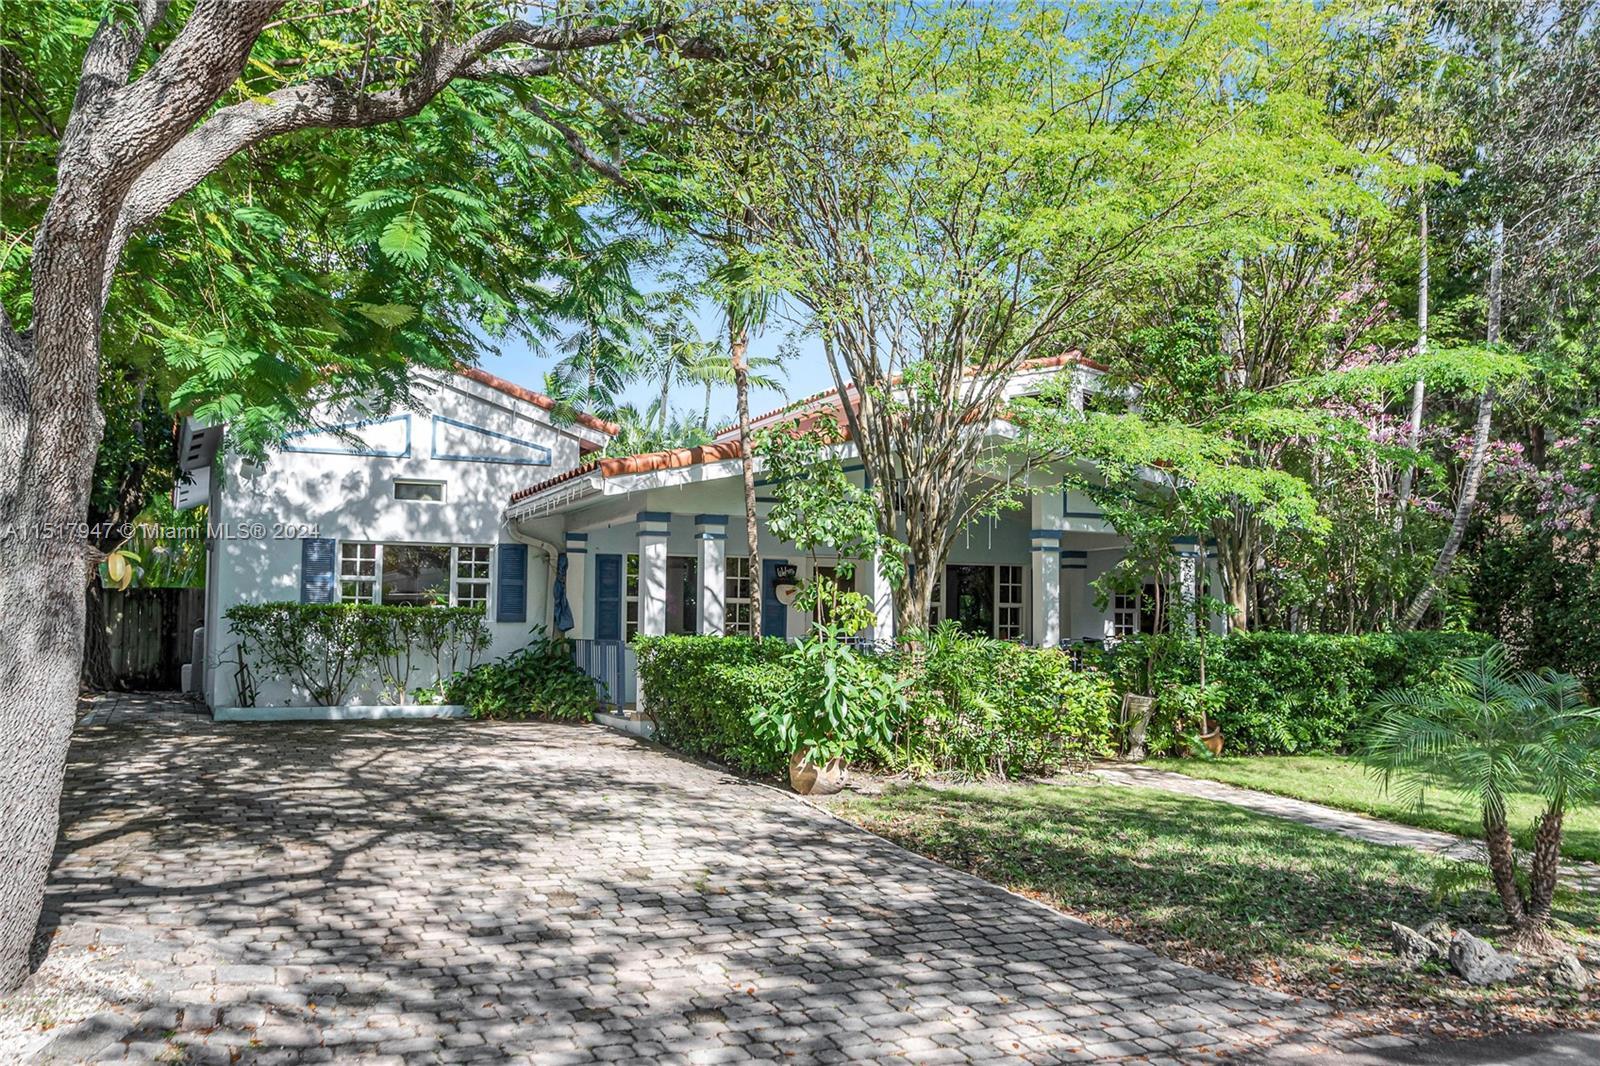 The "Key" to your piece of paradise awaits you! This charming coastal beauty sits on a picturesque t